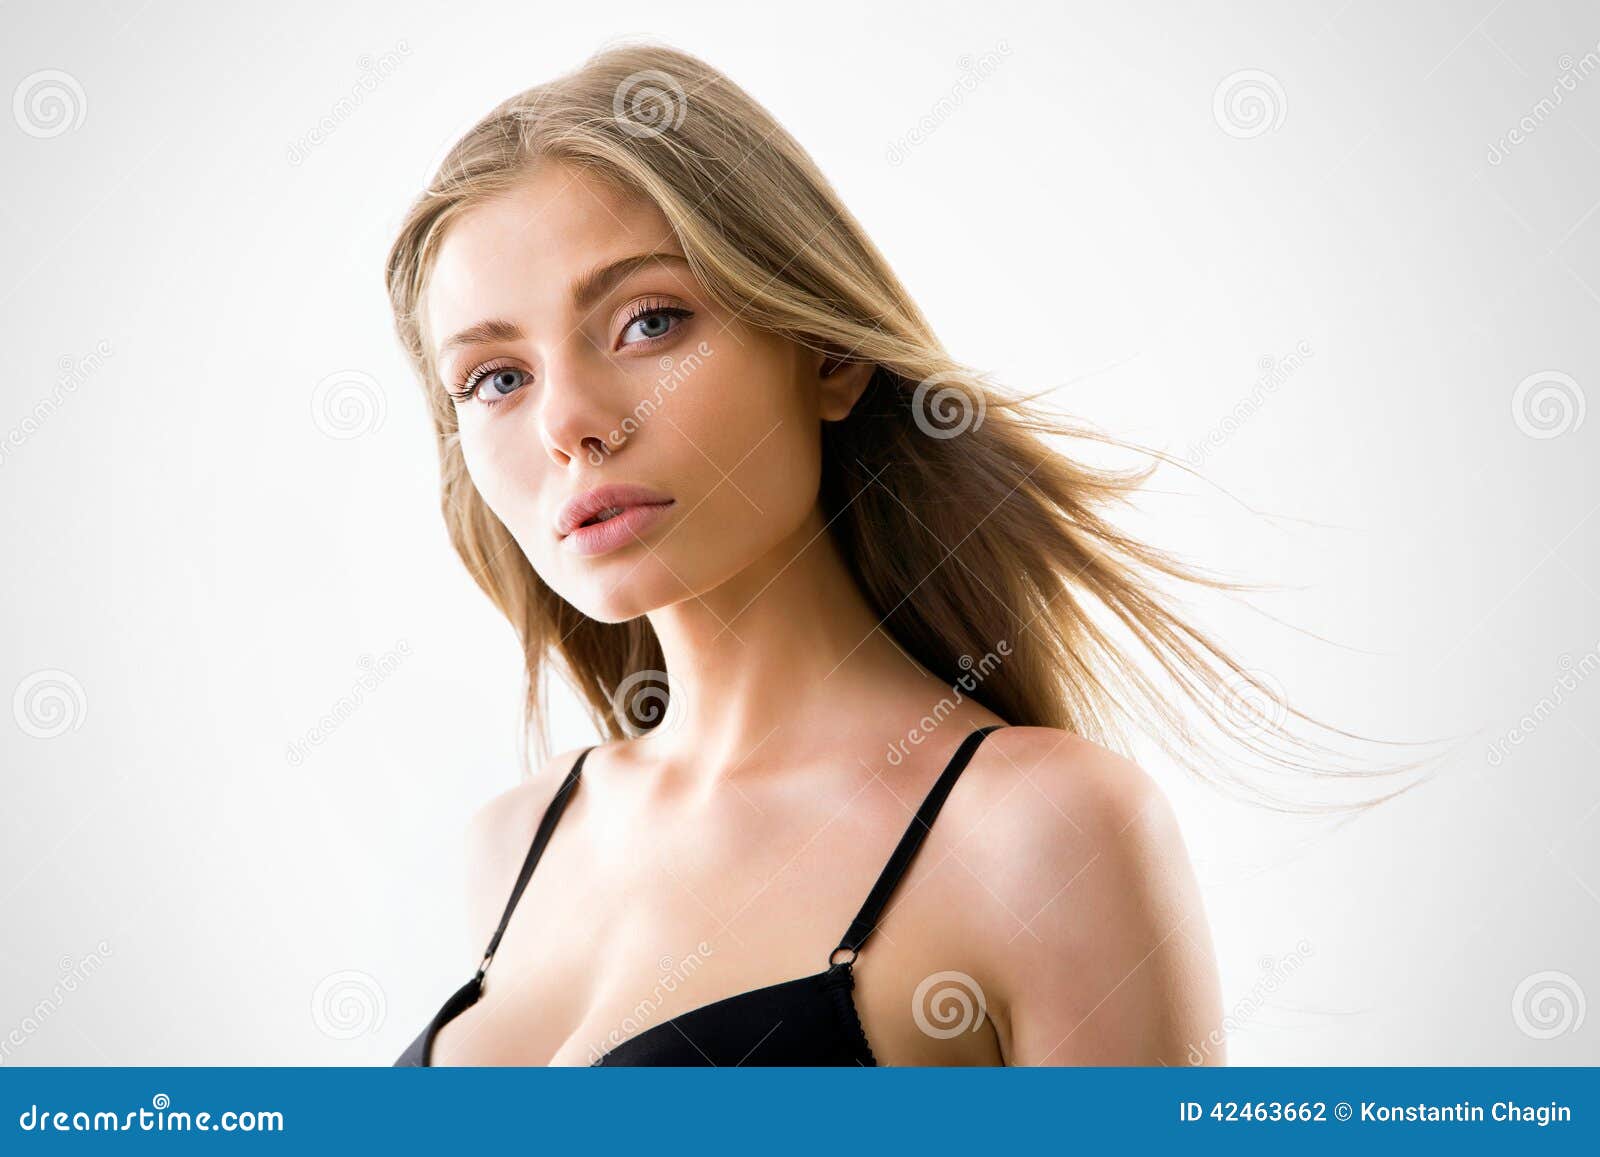 Beautiful half-dressed woman with magnificent hair